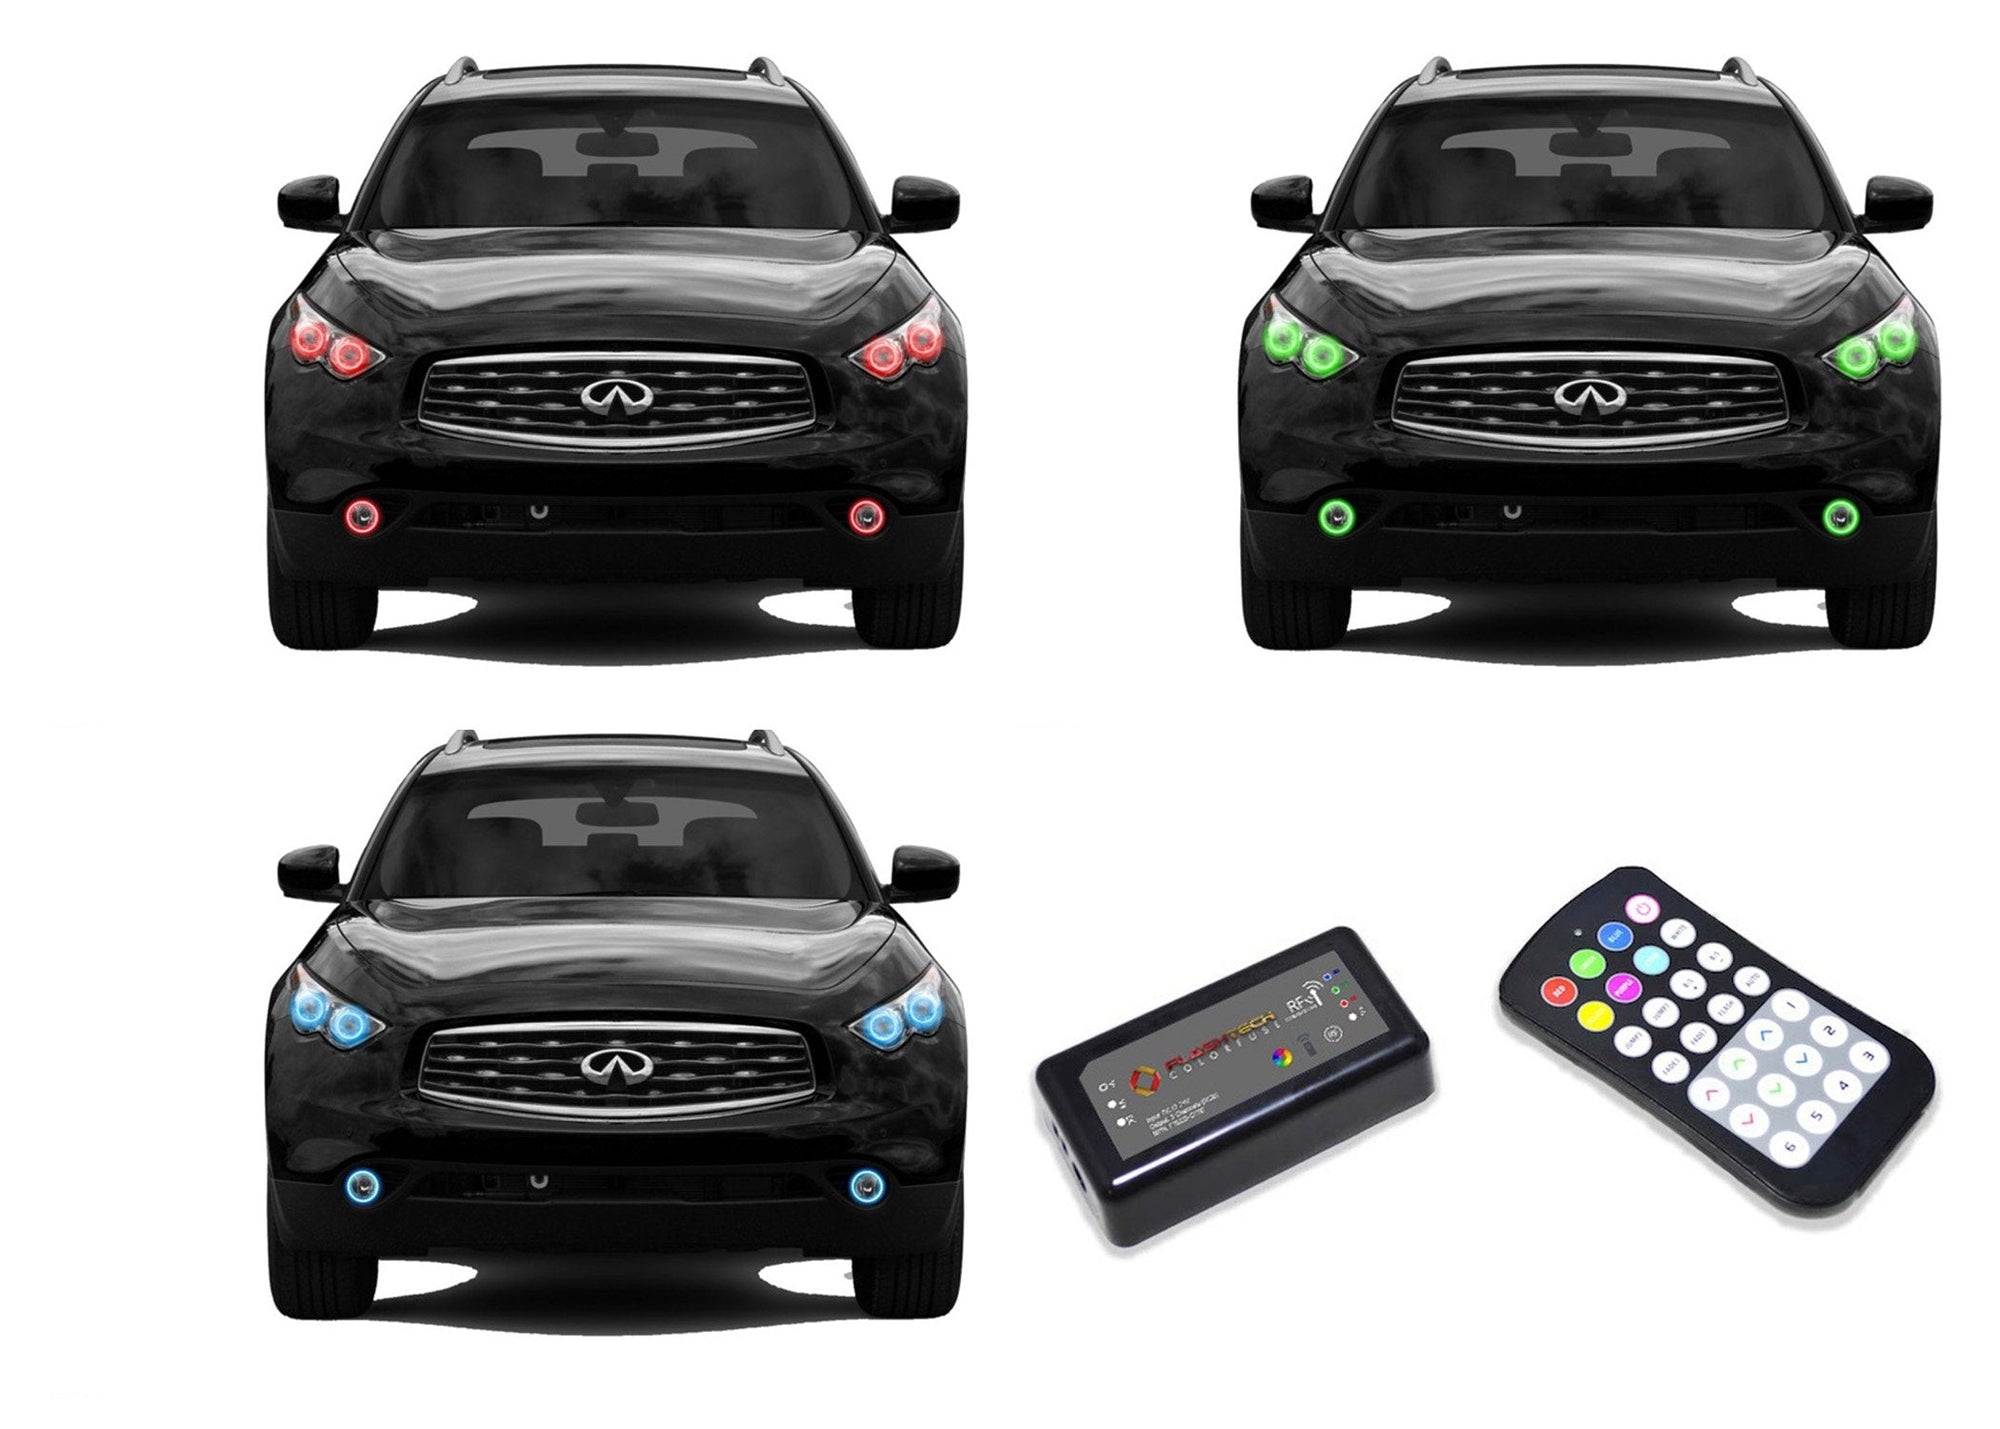 Infiniti-FX35 -2009, 2010, 2011, 2012-LED-Halo-Headlights and Fog Lights-RGB-Colorfuse RF Remote-IN-FX350912-V3HFCFRF